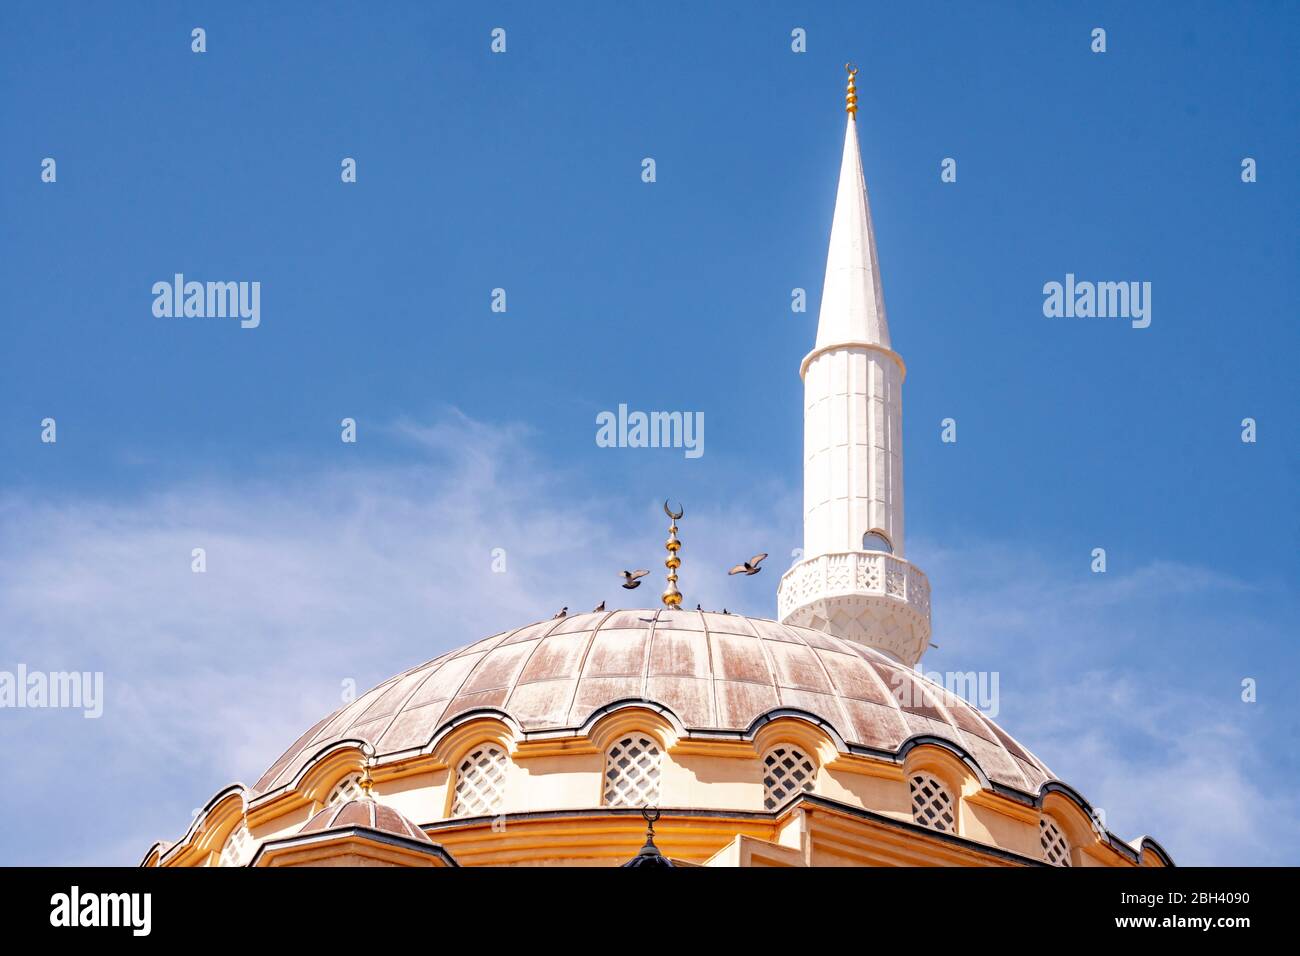 The dome and tower of a big mosque on on day light with blue sky night background. Ramadan concept. High quality photo Stock Photo